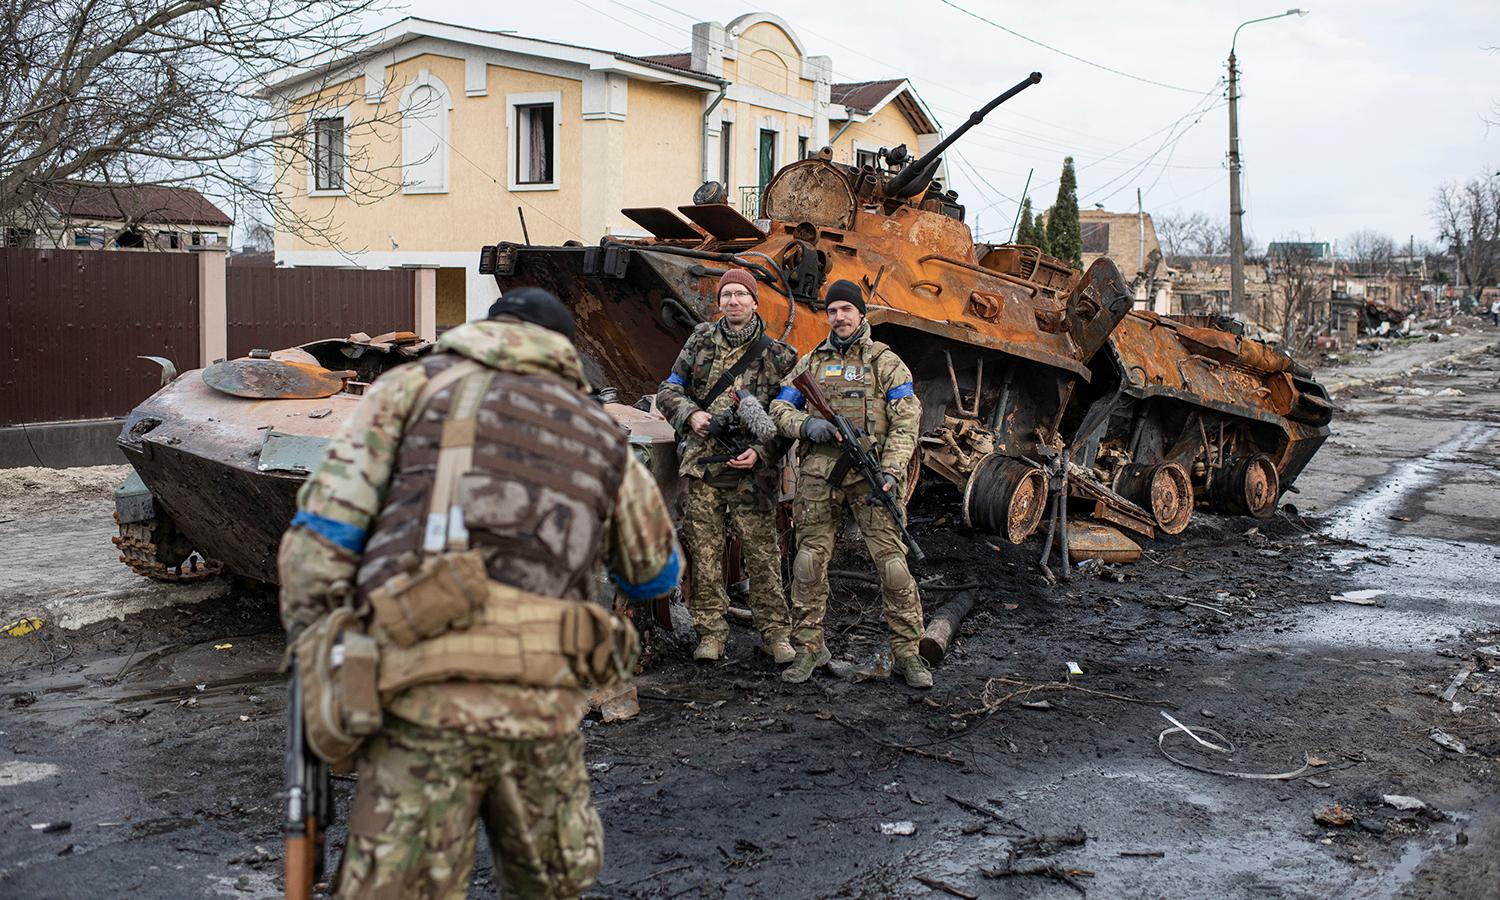 GuidePoint Security data shows ransomware attacks increased in 2022 over the same period in 2021, despite the Russian invasion of Ukraine. Pictured: Members of territorial defense take photos next to destroyed Russian armored personnel carriers on April 4, 2022, in Bucha, Ukraine. (Photo by Alexey Furman/Getty Images)